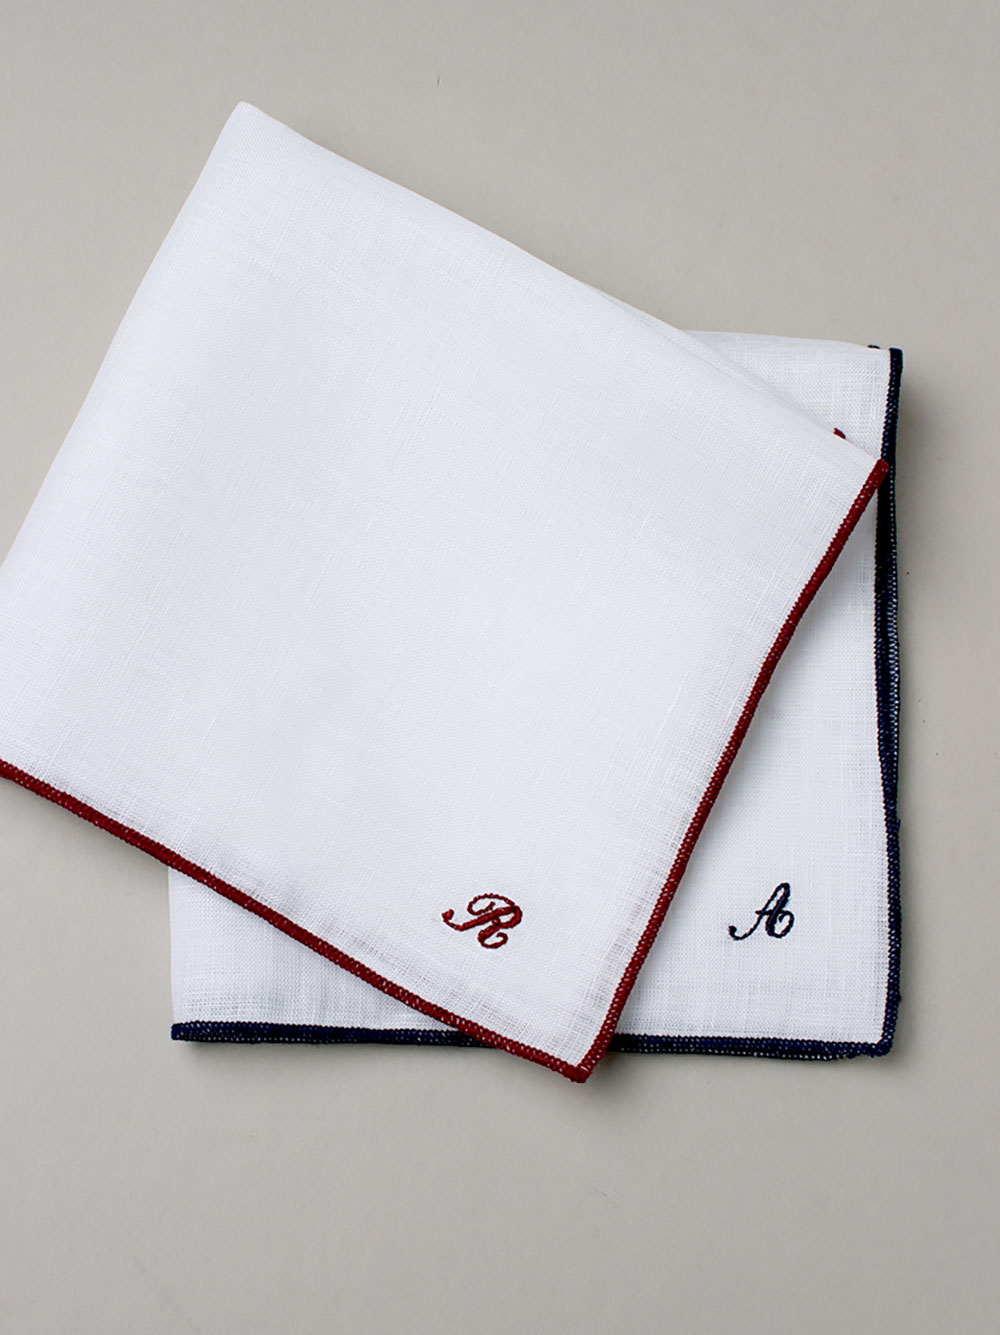 Get monogrammed pocket squares to personalize your wedding attire in a subtle way.